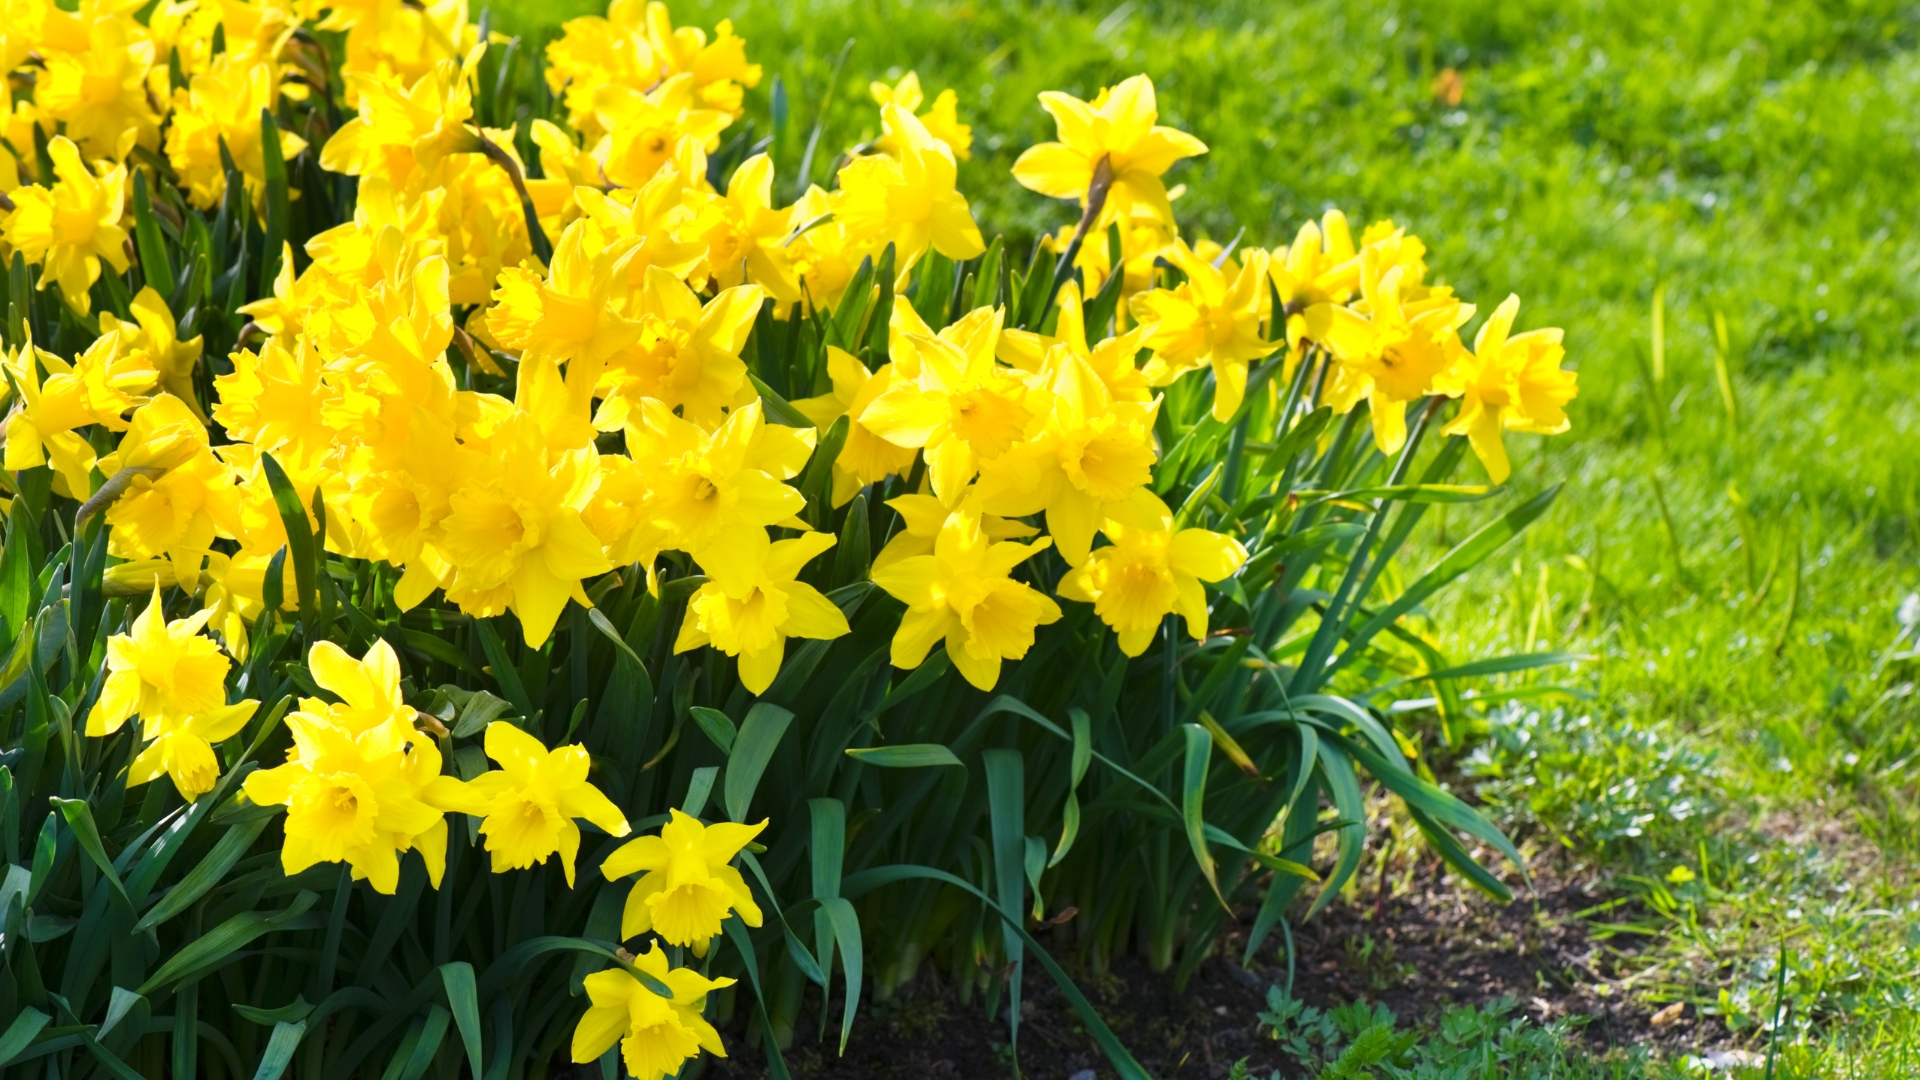 Here’s A Kitchen Scrap That’ll Give Your Daffodils A Boost